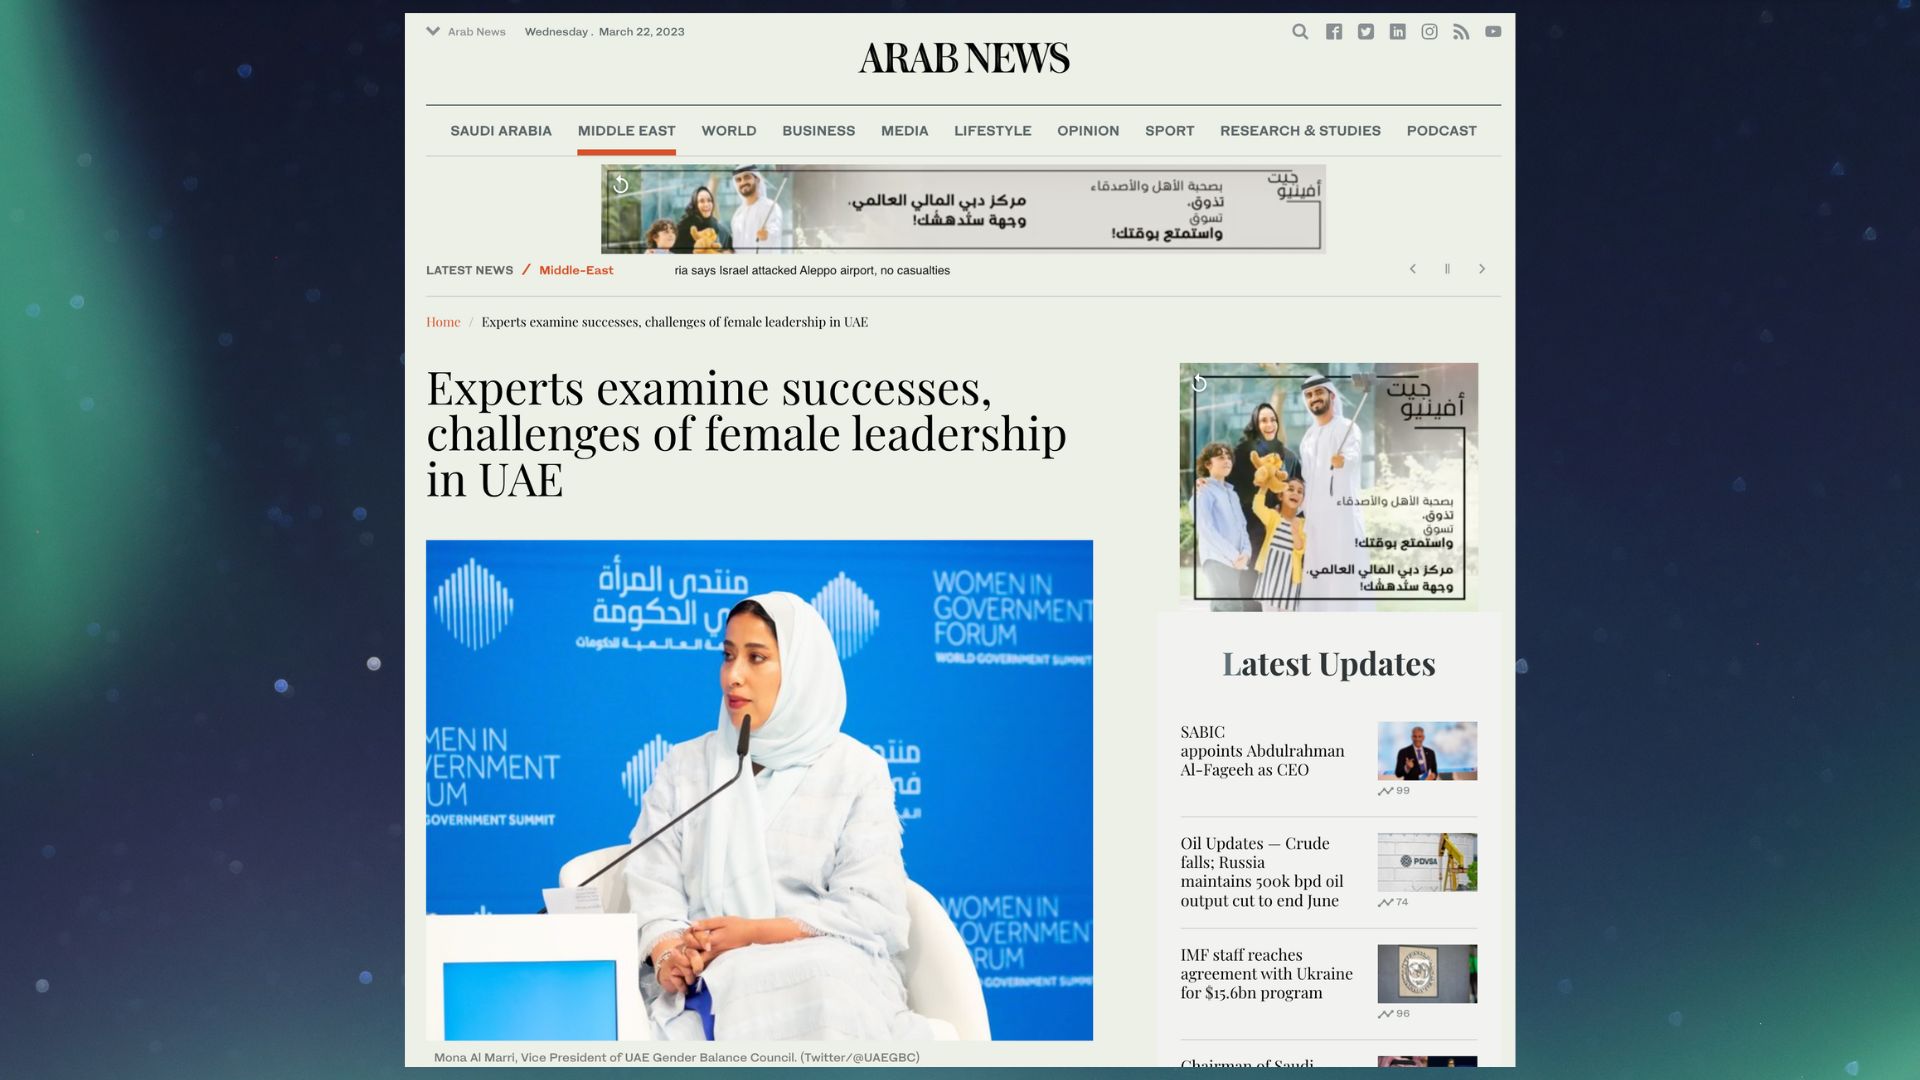 Aurora50 in the media - Arab News report on Emirates Society event, 16/03/23